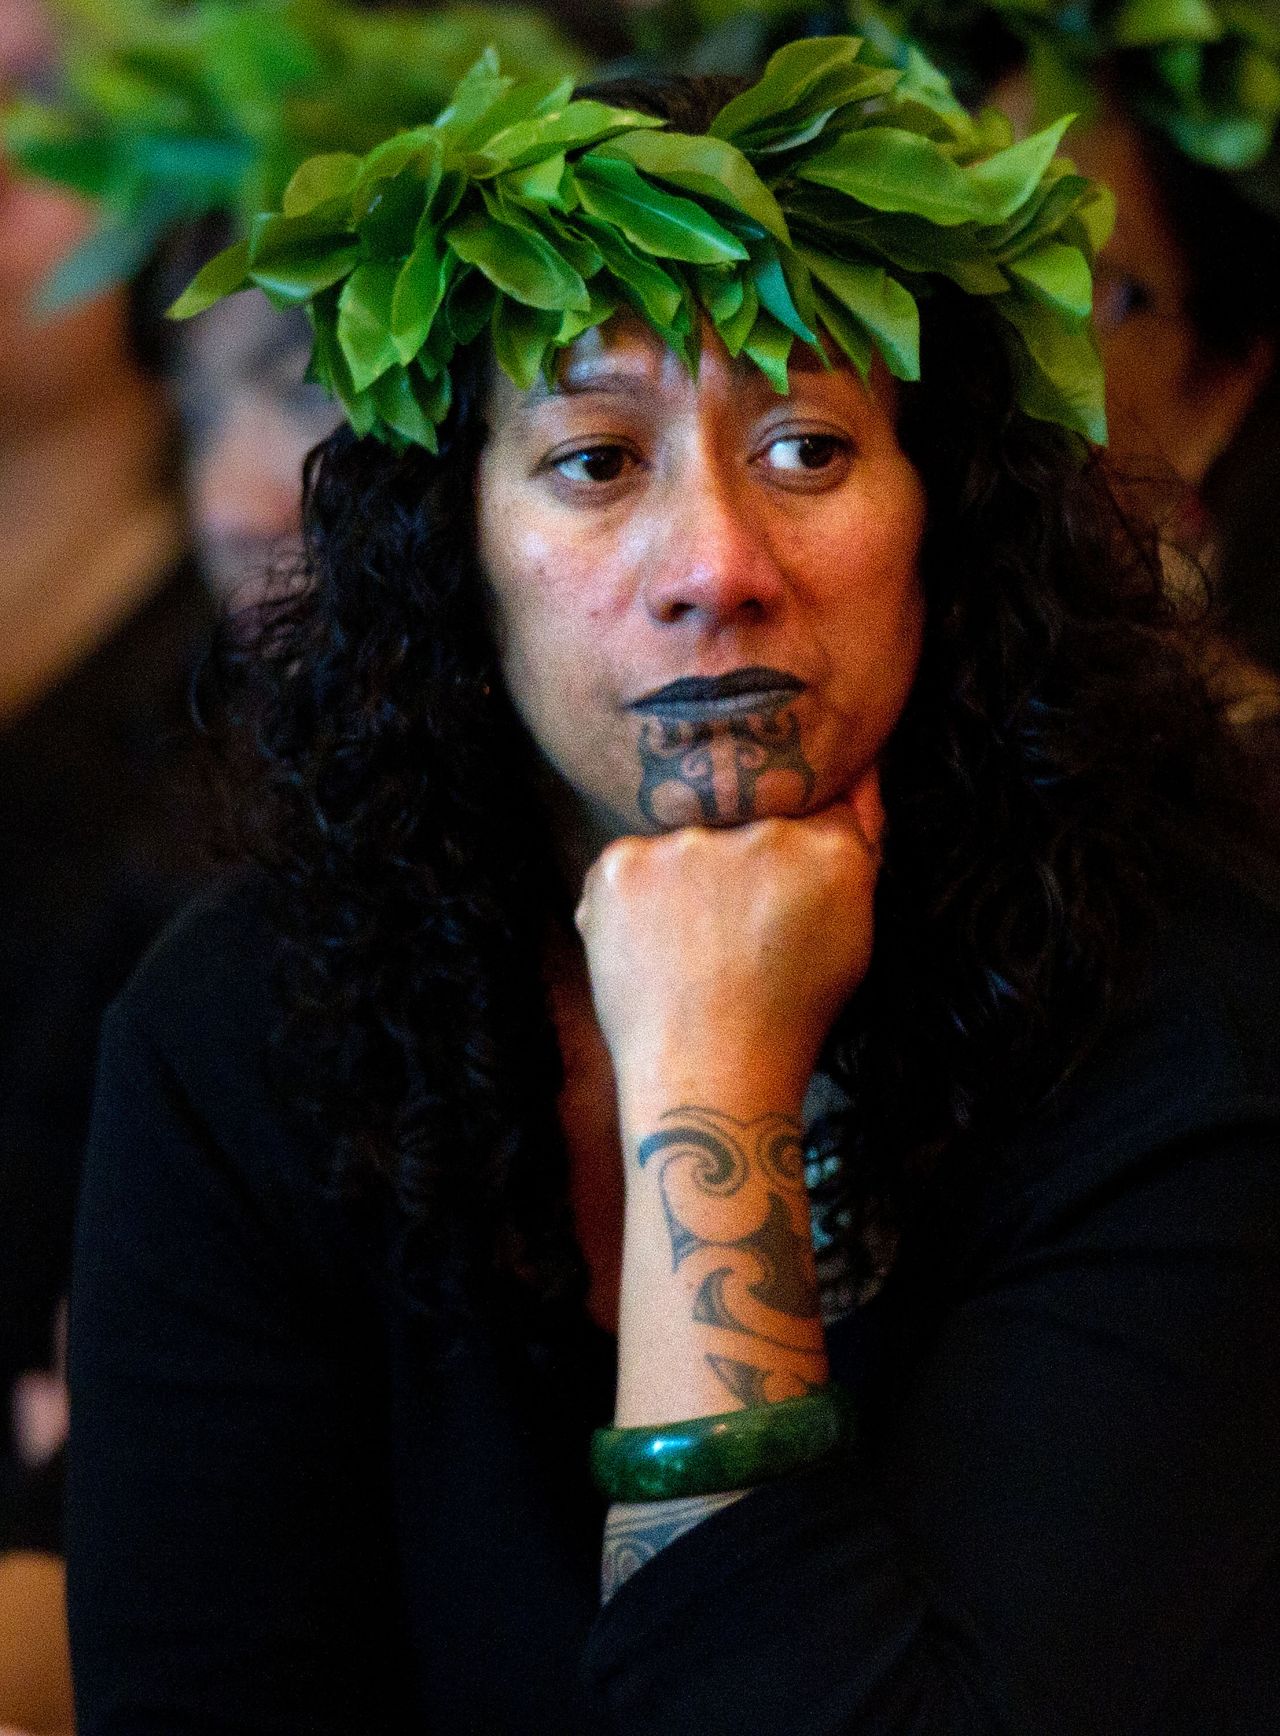 A member of the Māori group Tainui Waka Alliance at Te Papa Museum in Wellington in 2012, as the museum welcomed 20 mummified tattooed heads that were taken to Europe in the 1700s and 1800s.